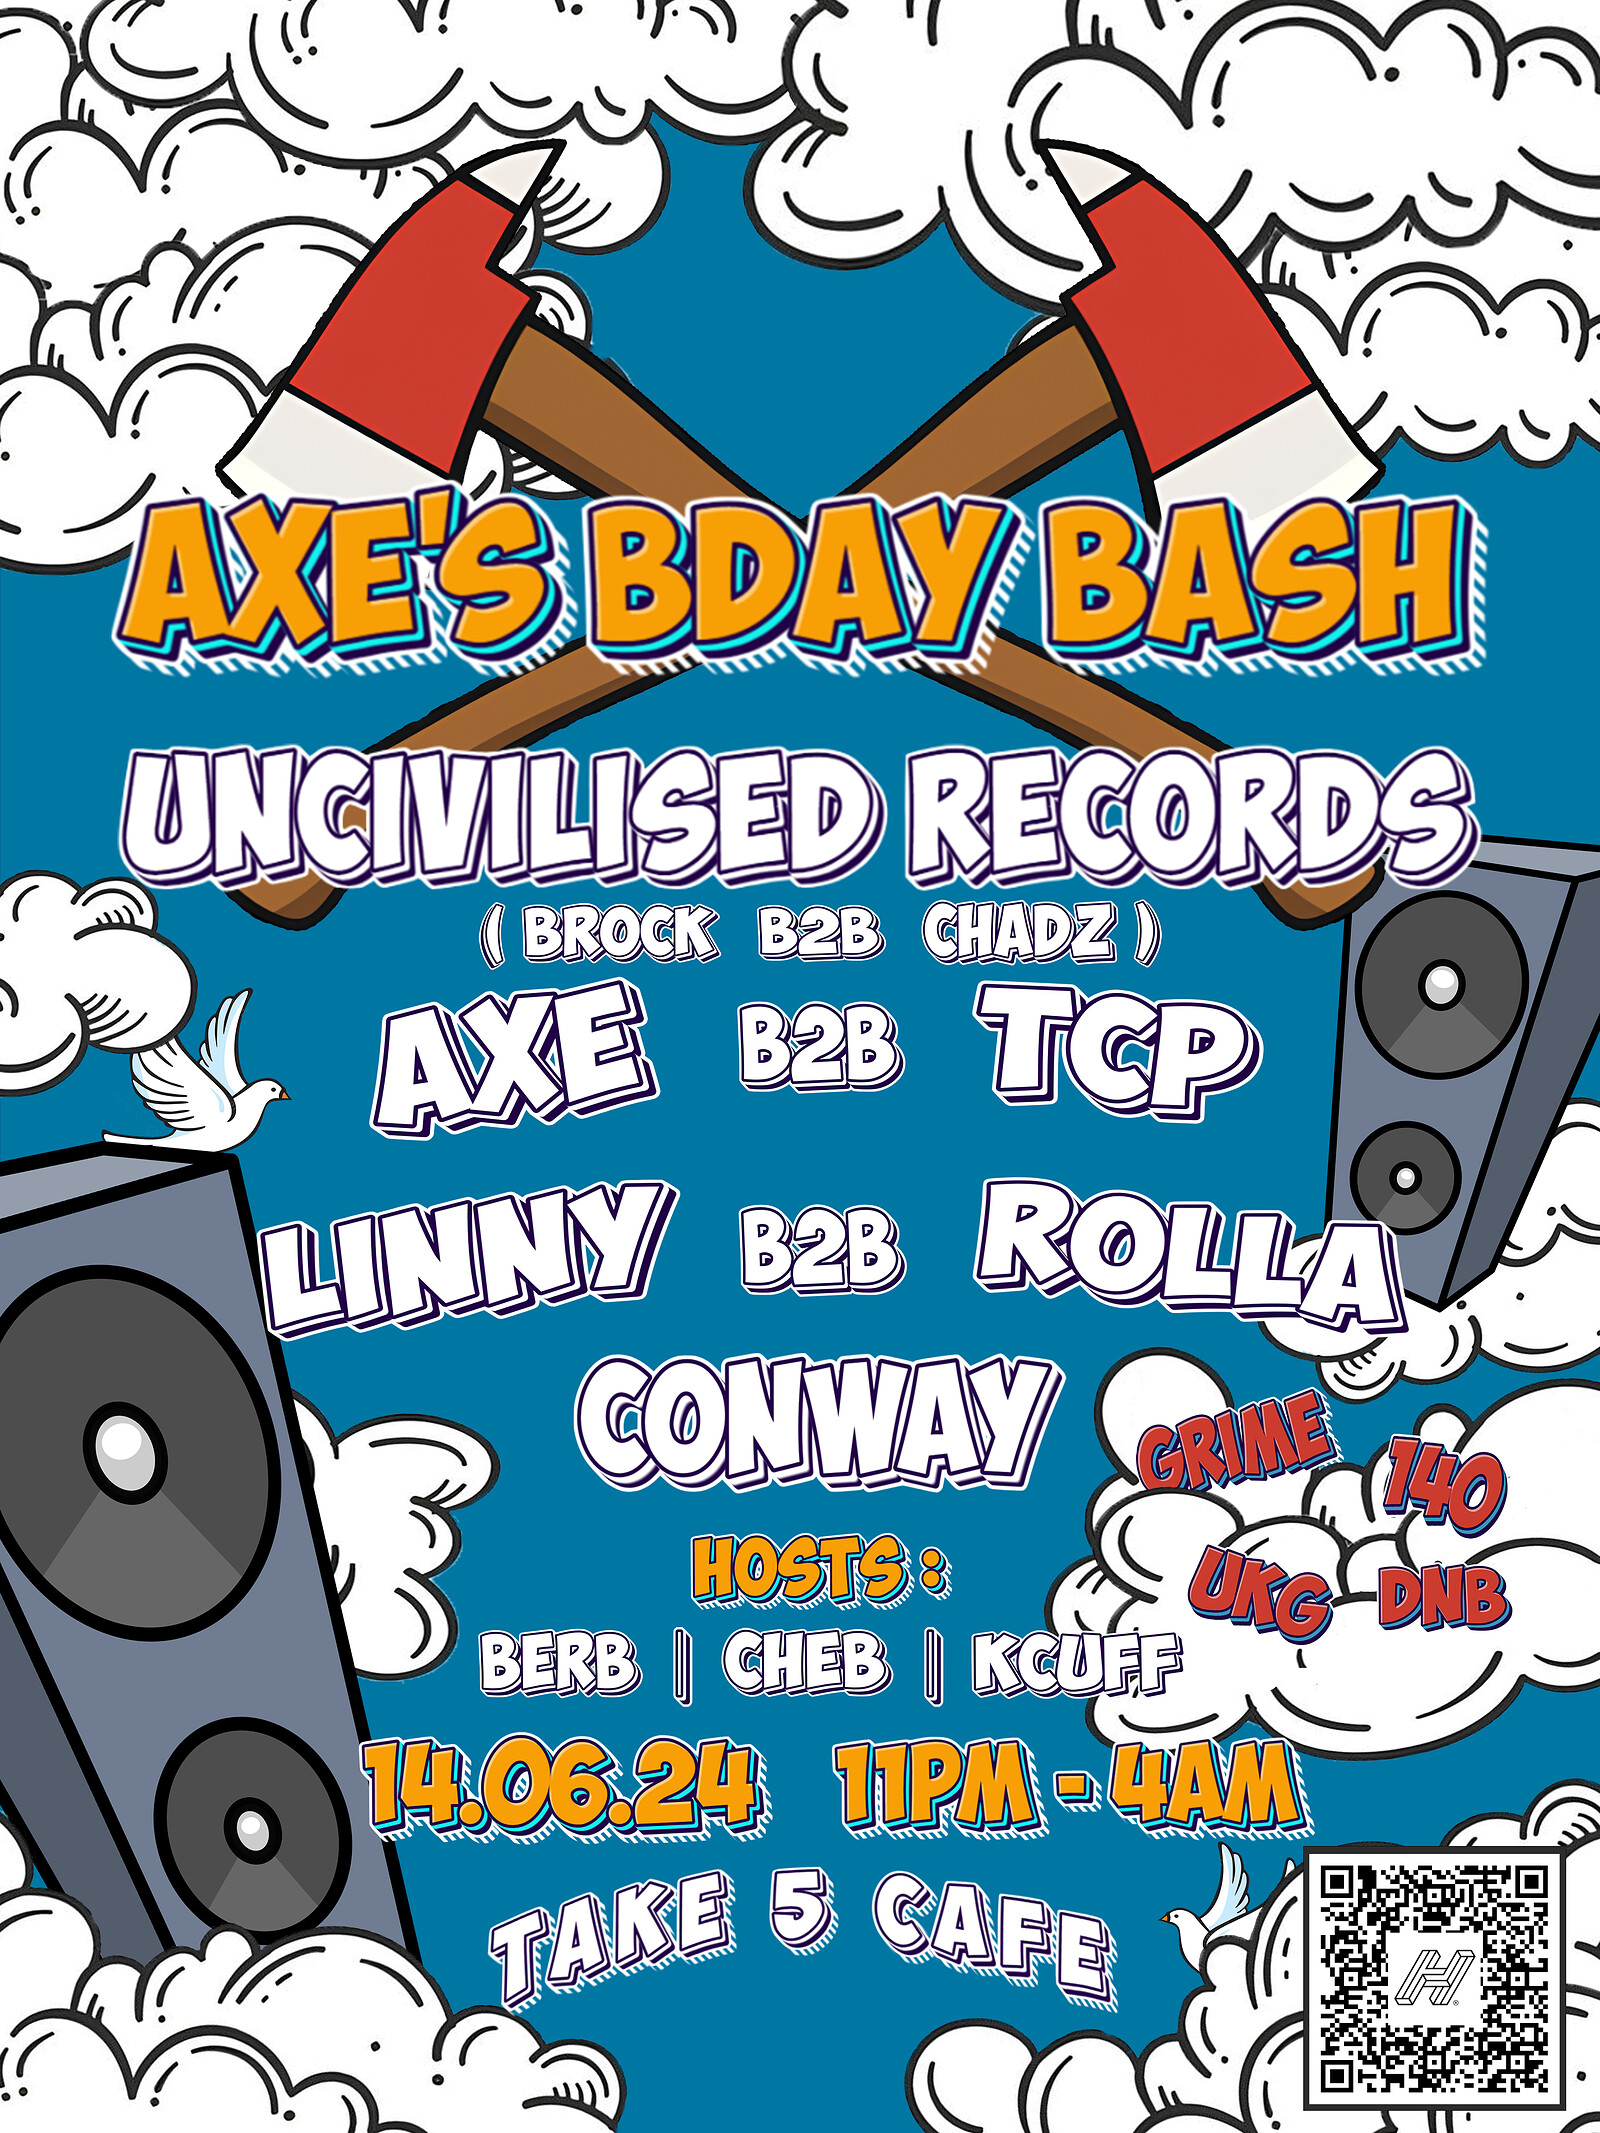 AXE'S BDAY BASH at Take Five Cafe